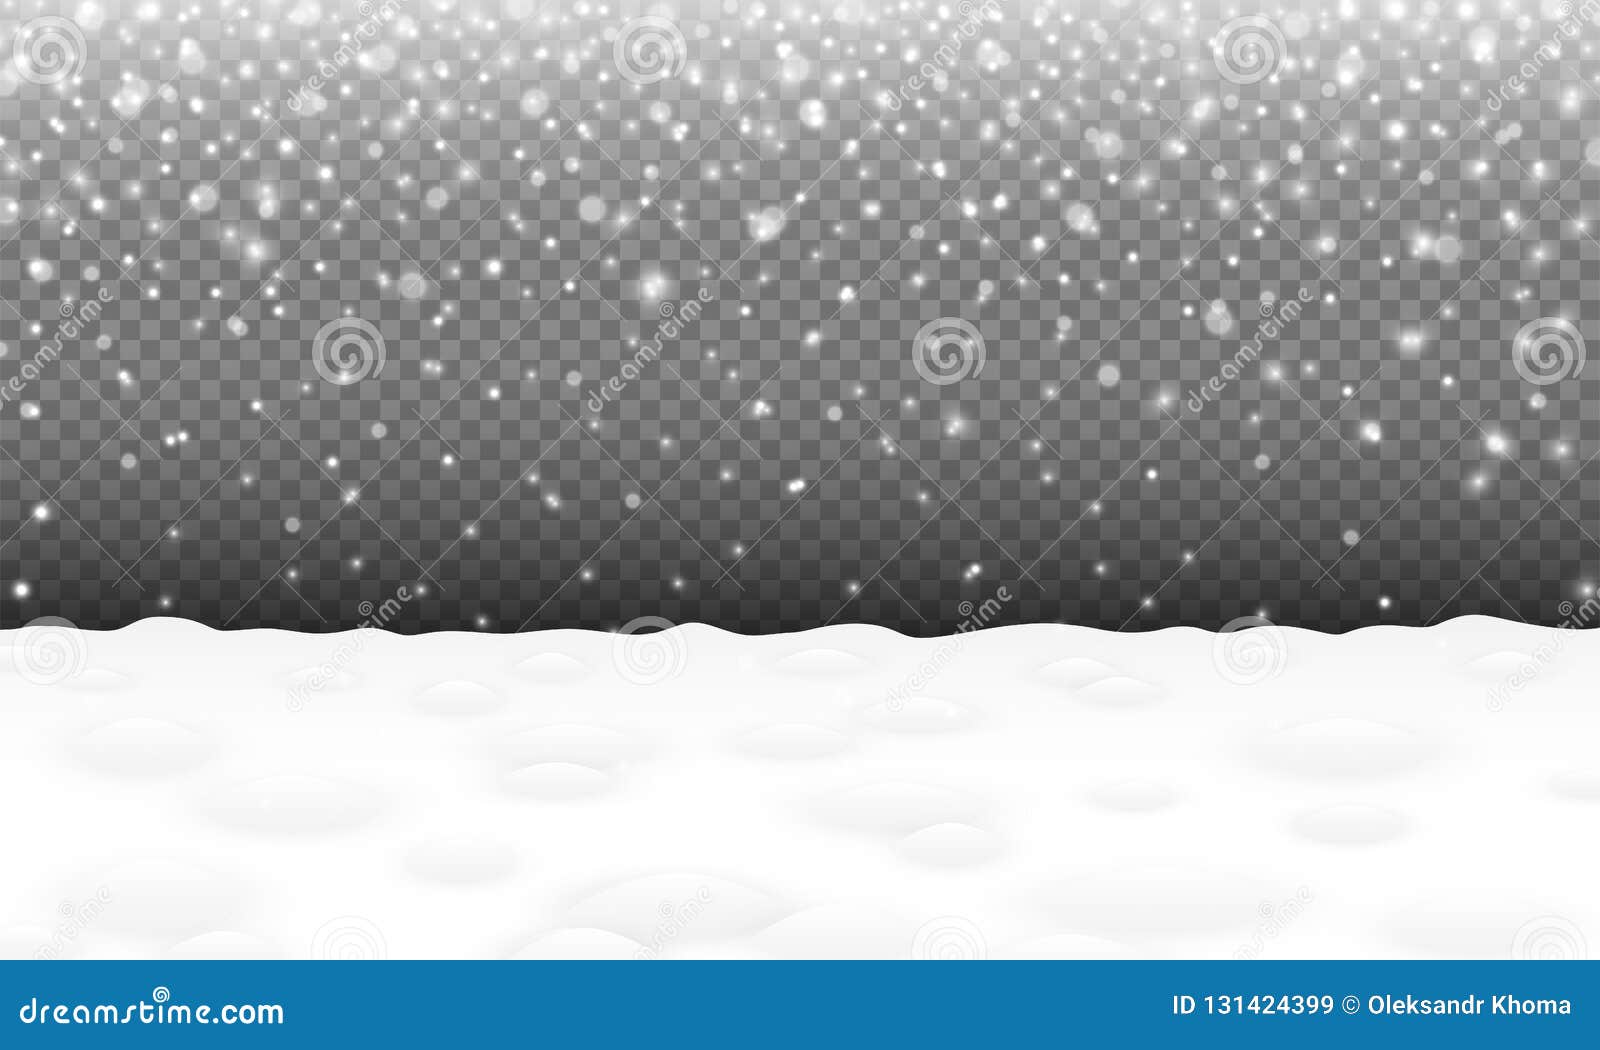 Falling Snow With Snowy Landscape And Snowdrifts Christmas Or New Year